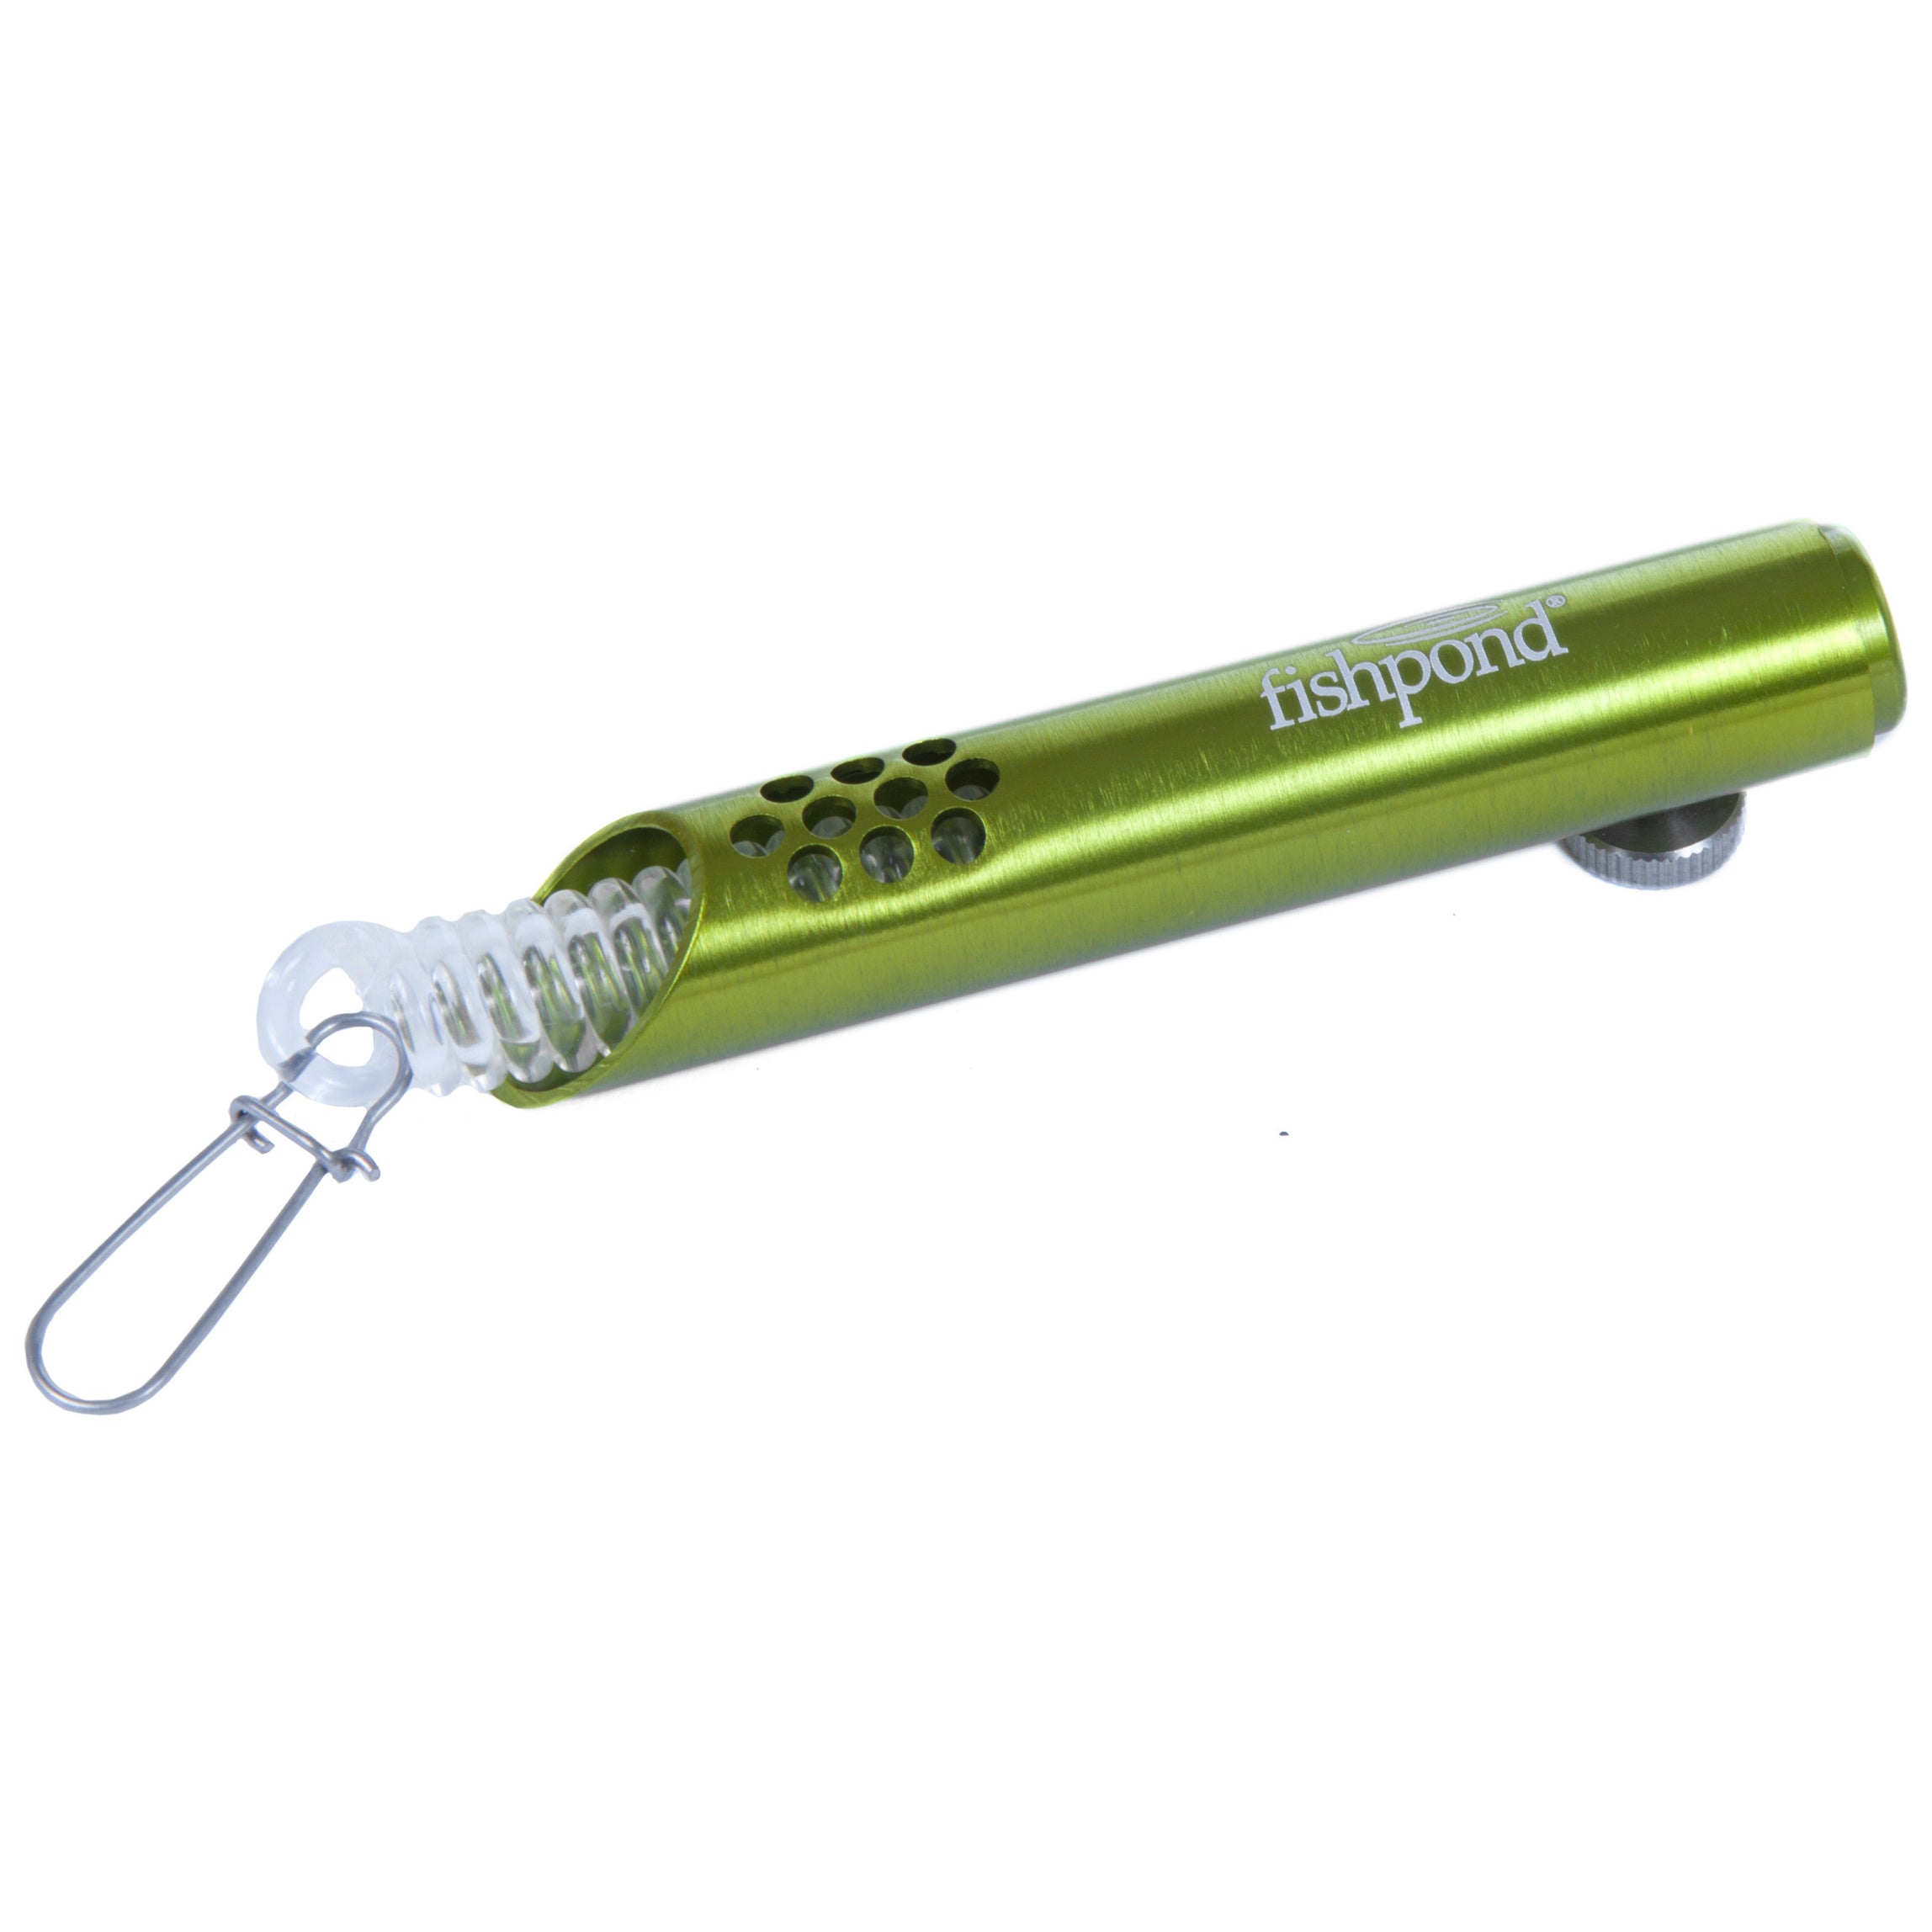 Fishpond Swivel Retractor – Tailwaters Fly Fishing